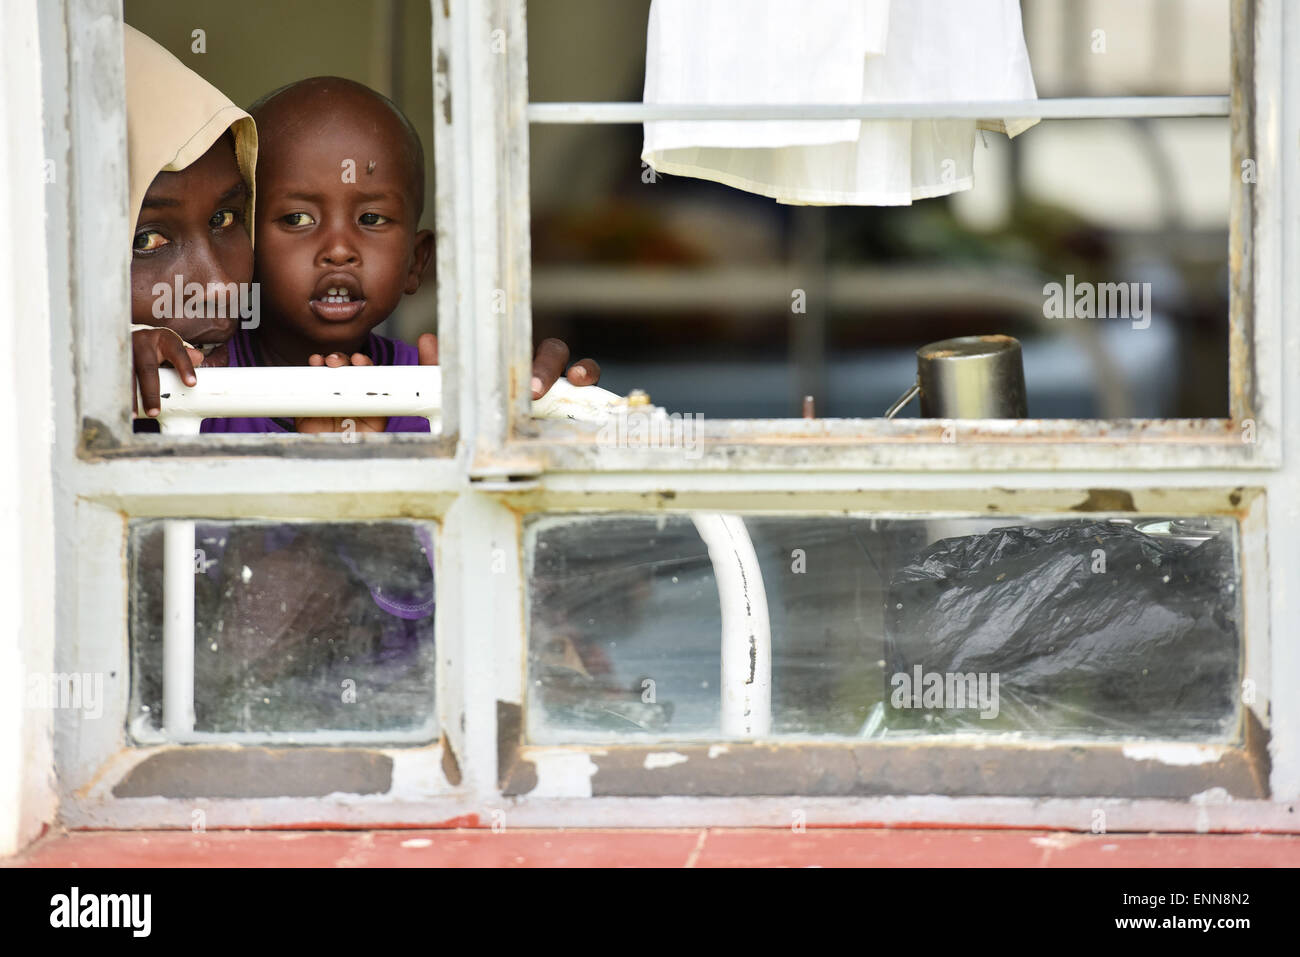 (150508) --DADAAB, May 8, 2015 (Xinhua) -- A refugee mother and her child look outside of a window at a hospital in Dadaab refugee camp, Kenya, May 8, 2015. Dadaab, the world's largest refugee camp in northeastern Kenya, currently houses some 350,000 people. For more than 20 years, it has been home to generations of Somalis who have fled their homeland wracked by conflicts. (Xinhua/Sun Ruibo) Stock Photo